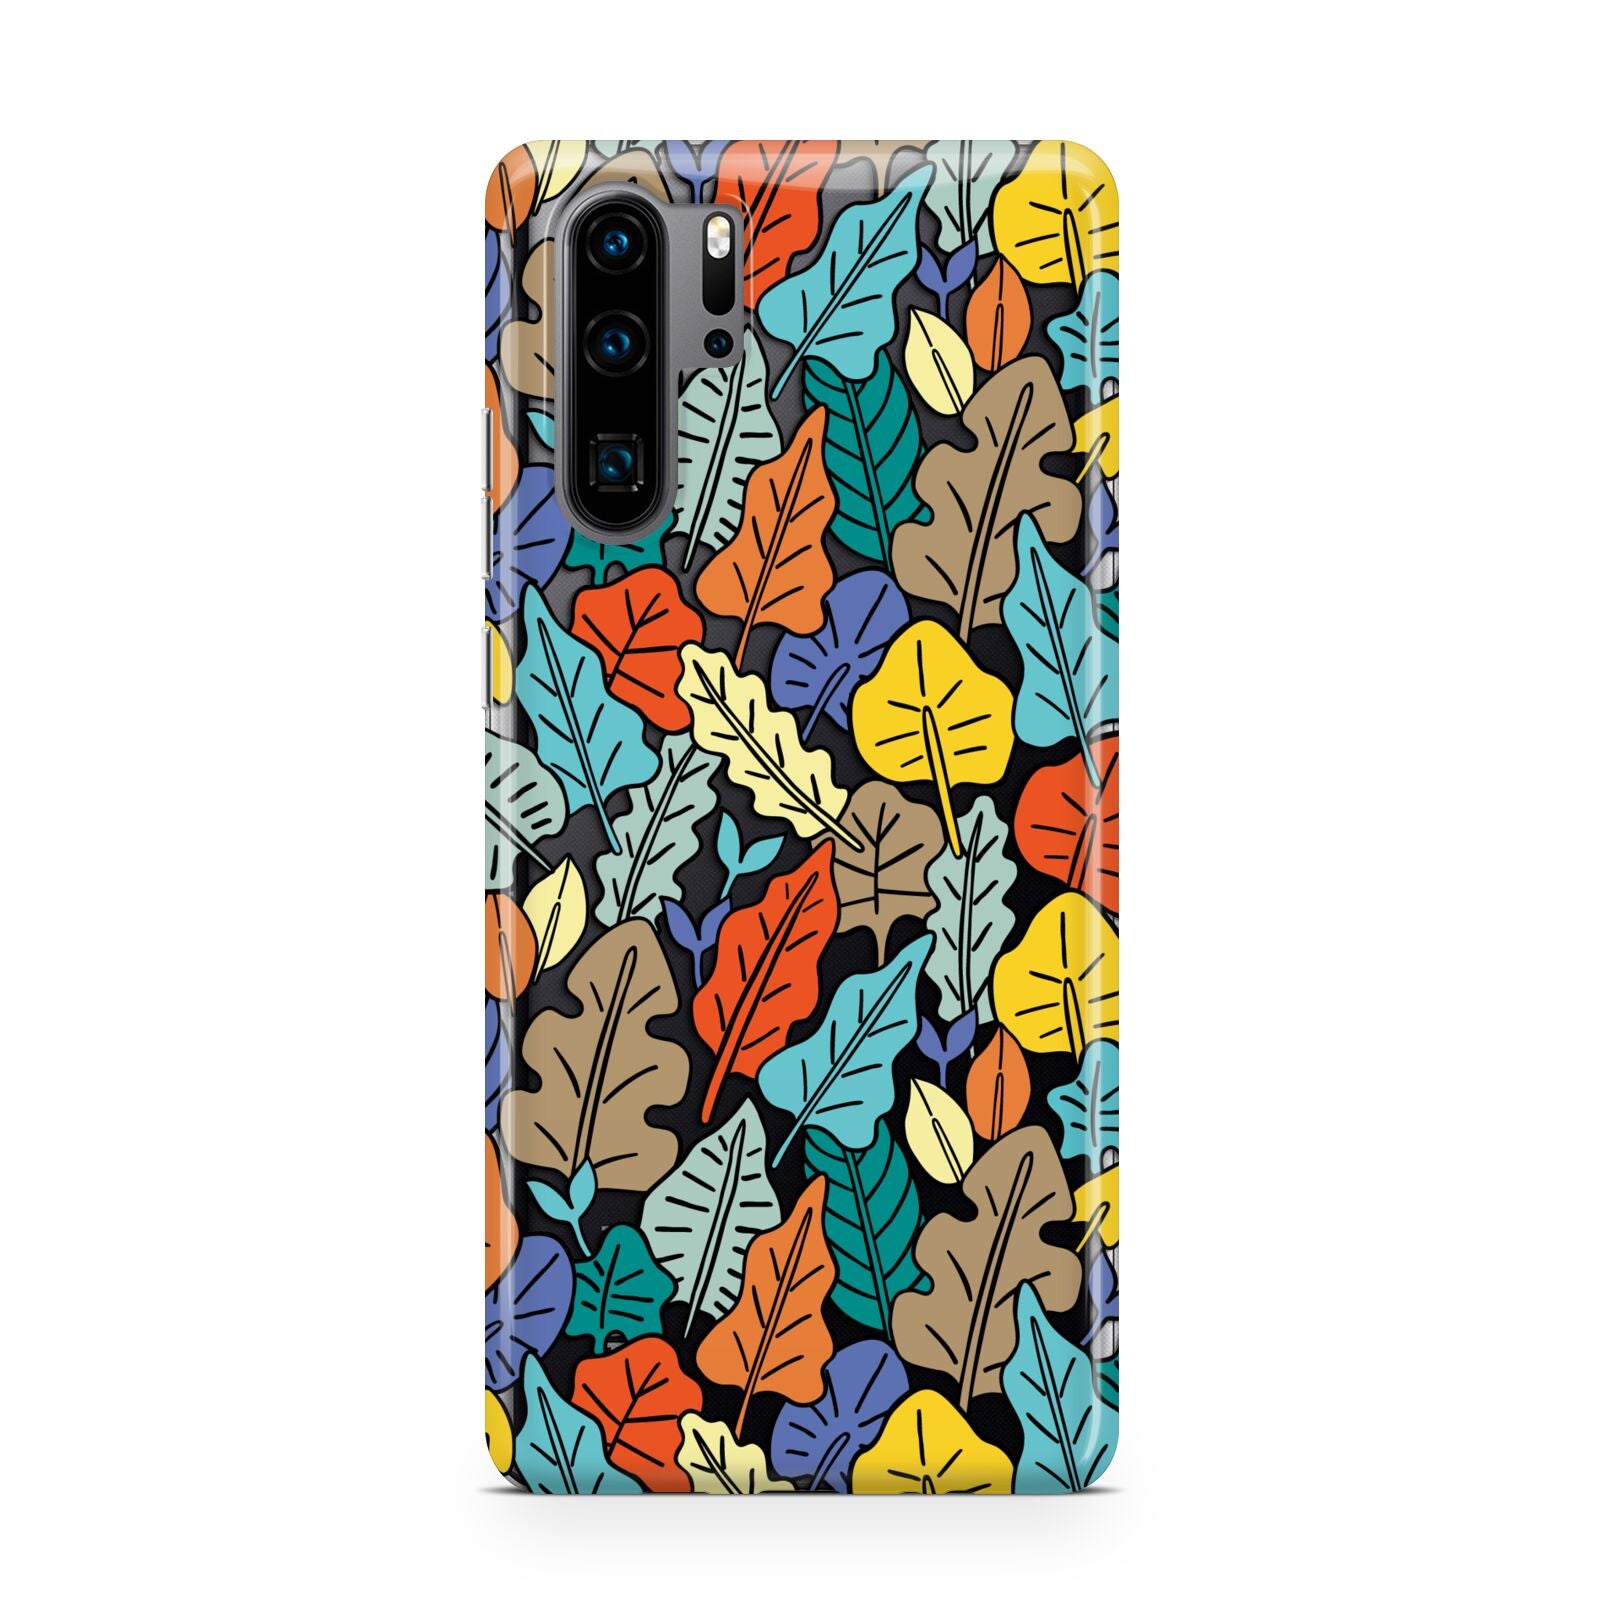 Autumn Leaves Huawei P30 Pro Phone Case